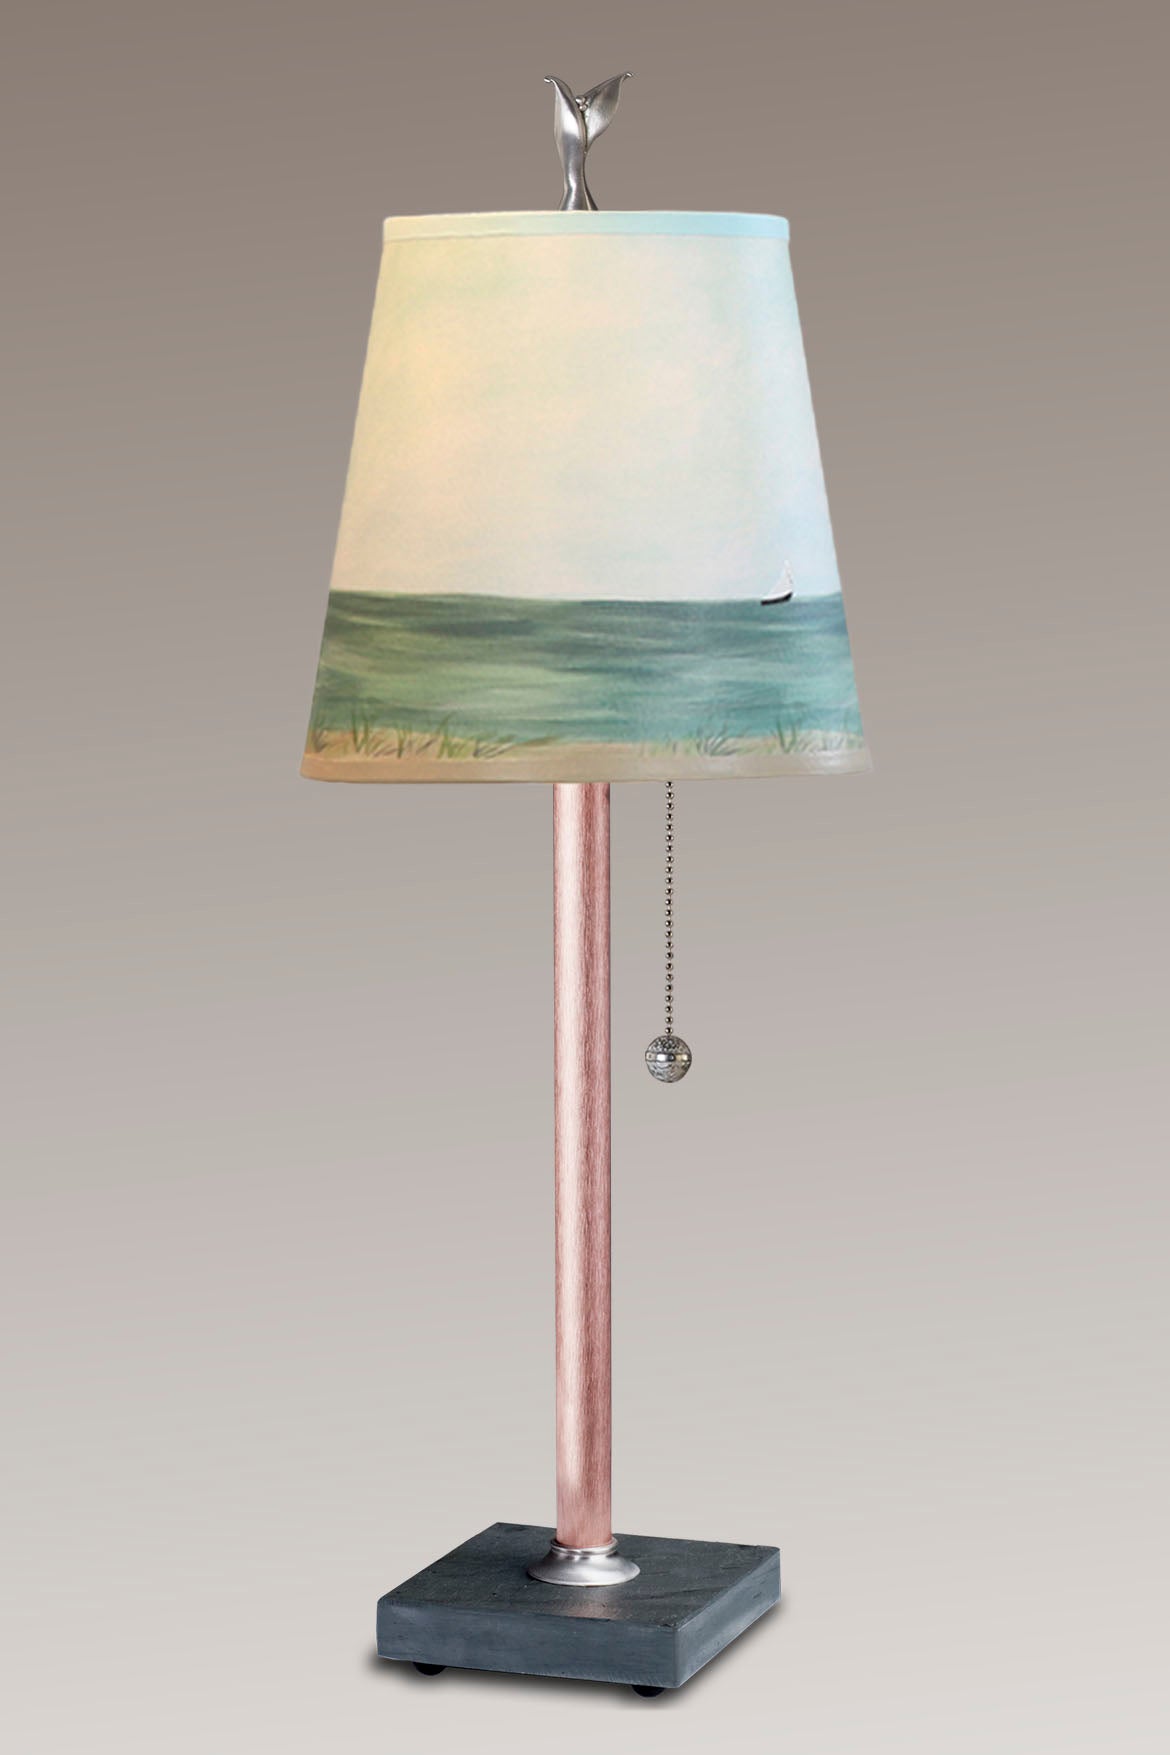 Janna Ugone & Co Table Lamps Copper Table Lamp with Small Drum Shade in Shore